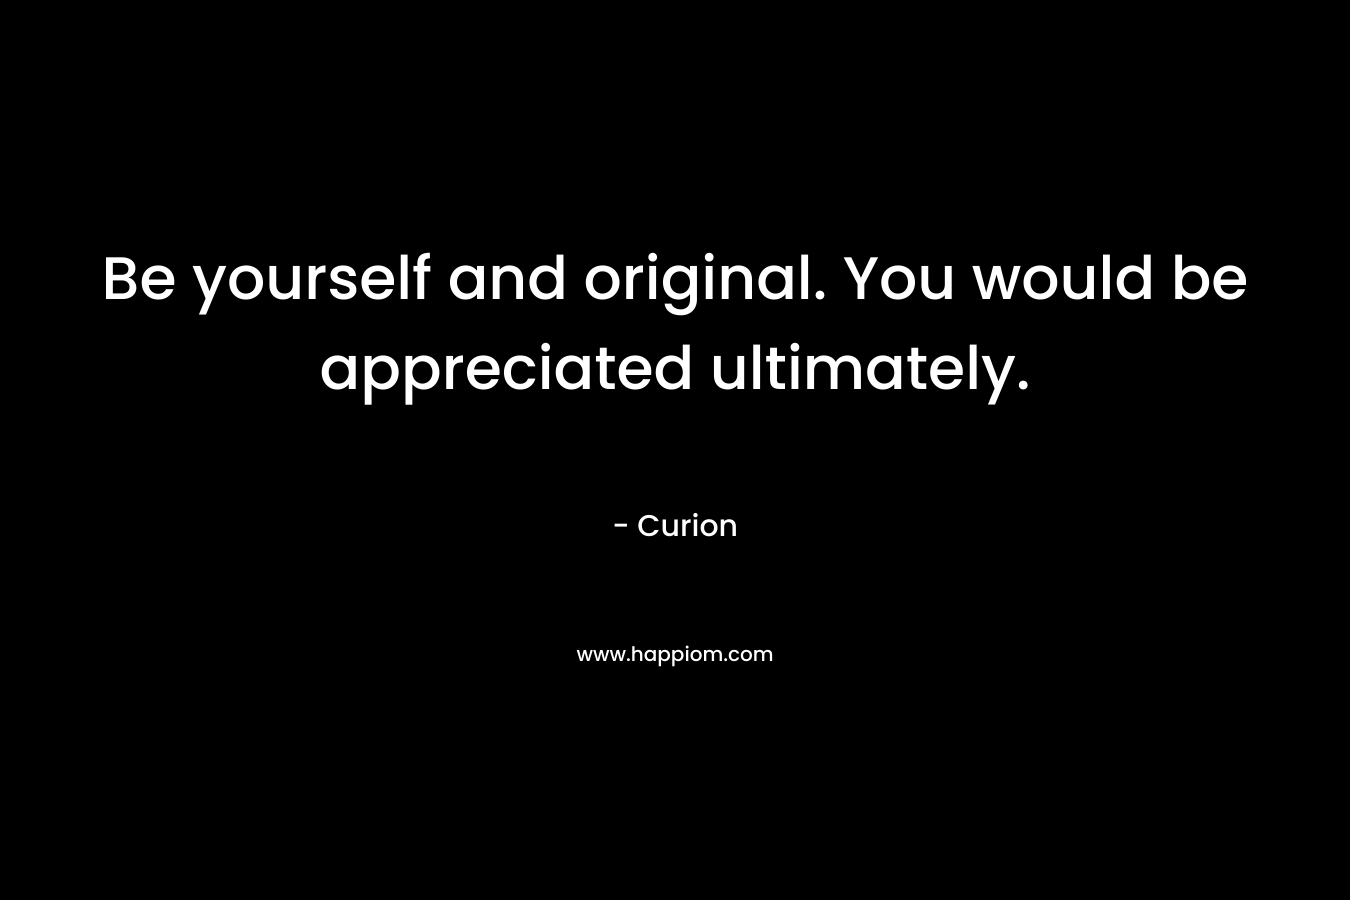 Be yourself and original. You would be appreciated ultimately.